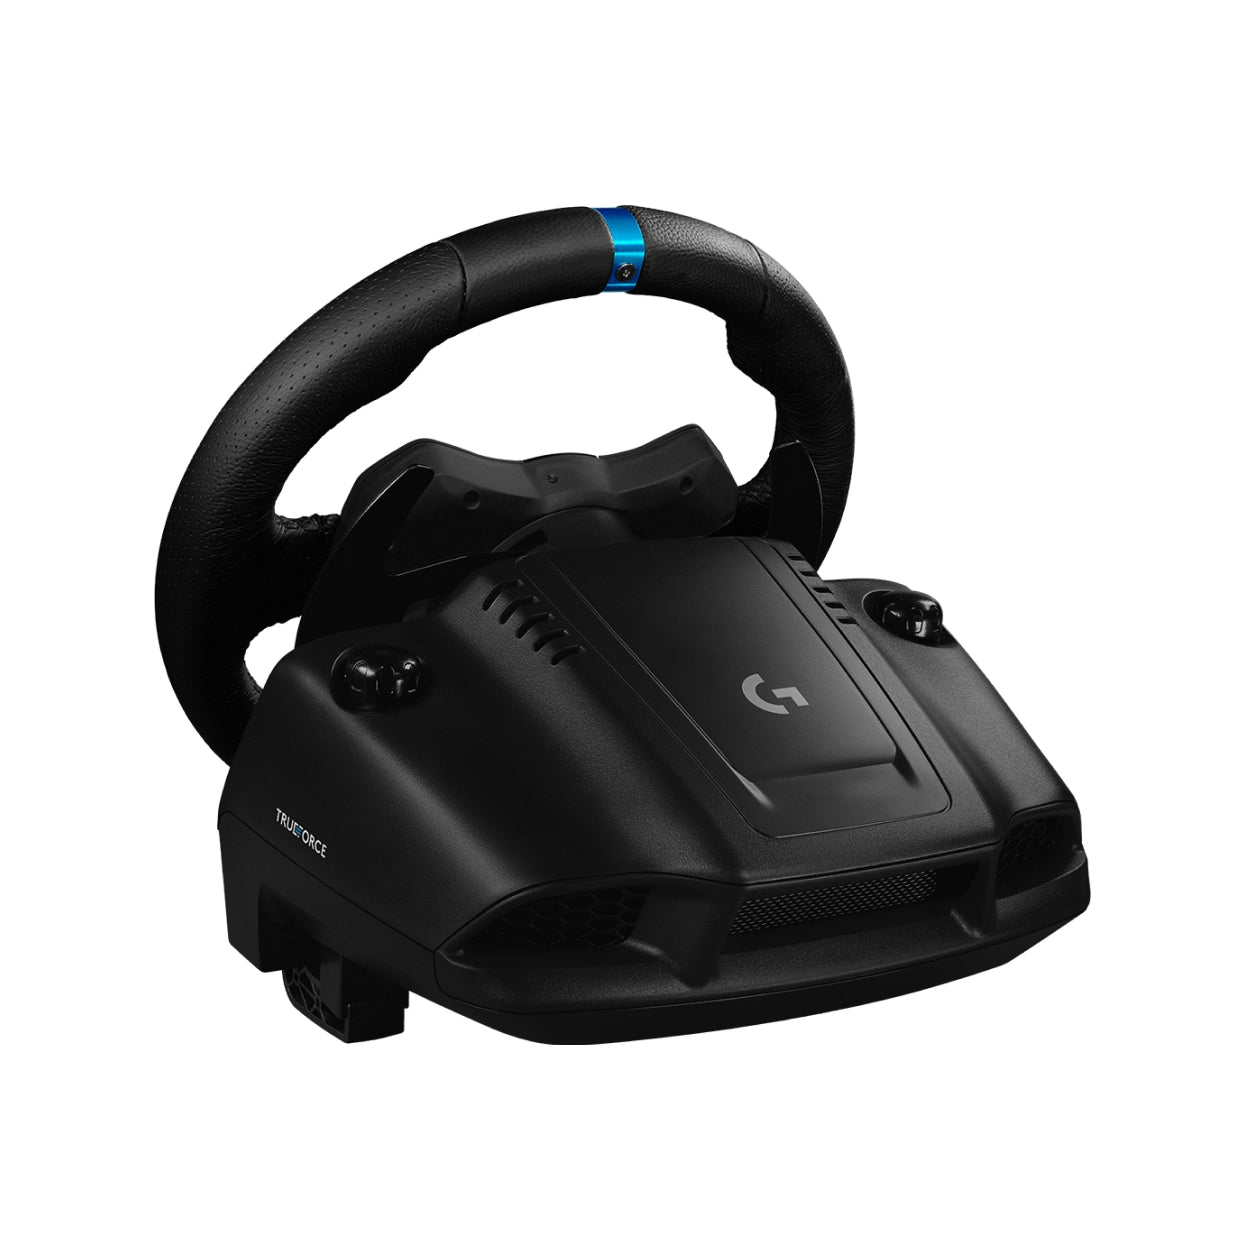 Logitech G923 Trueforce Racing Wheel/Pedals for Xbox/ PS4 / PS5 / PC